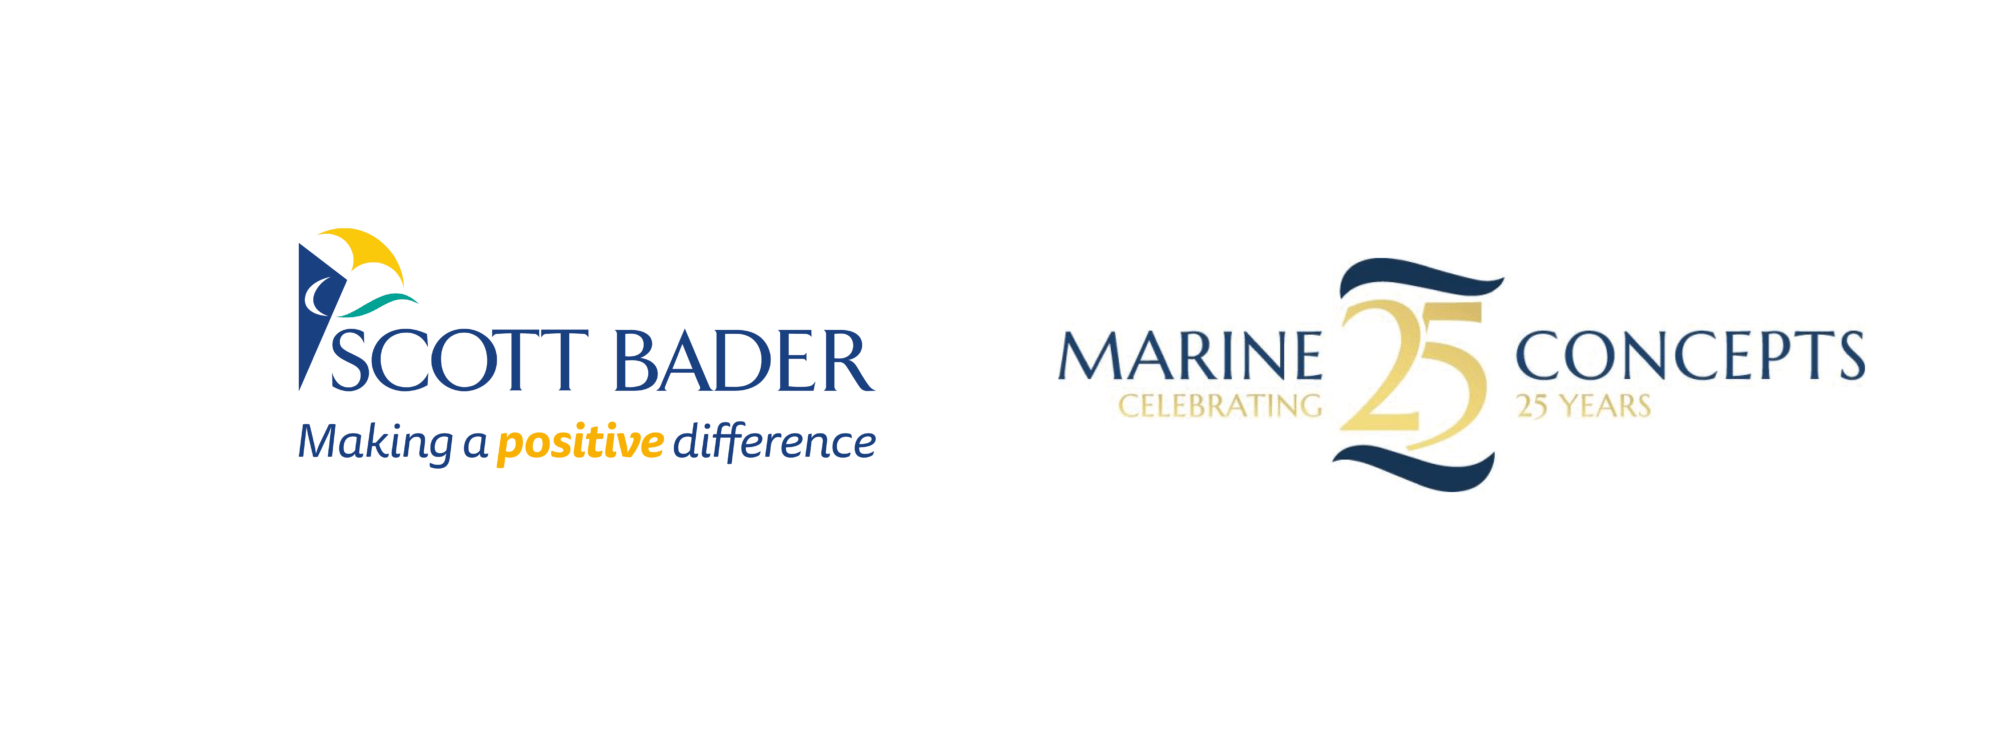 Celebrating 25 years of partnership with Marine Concepts